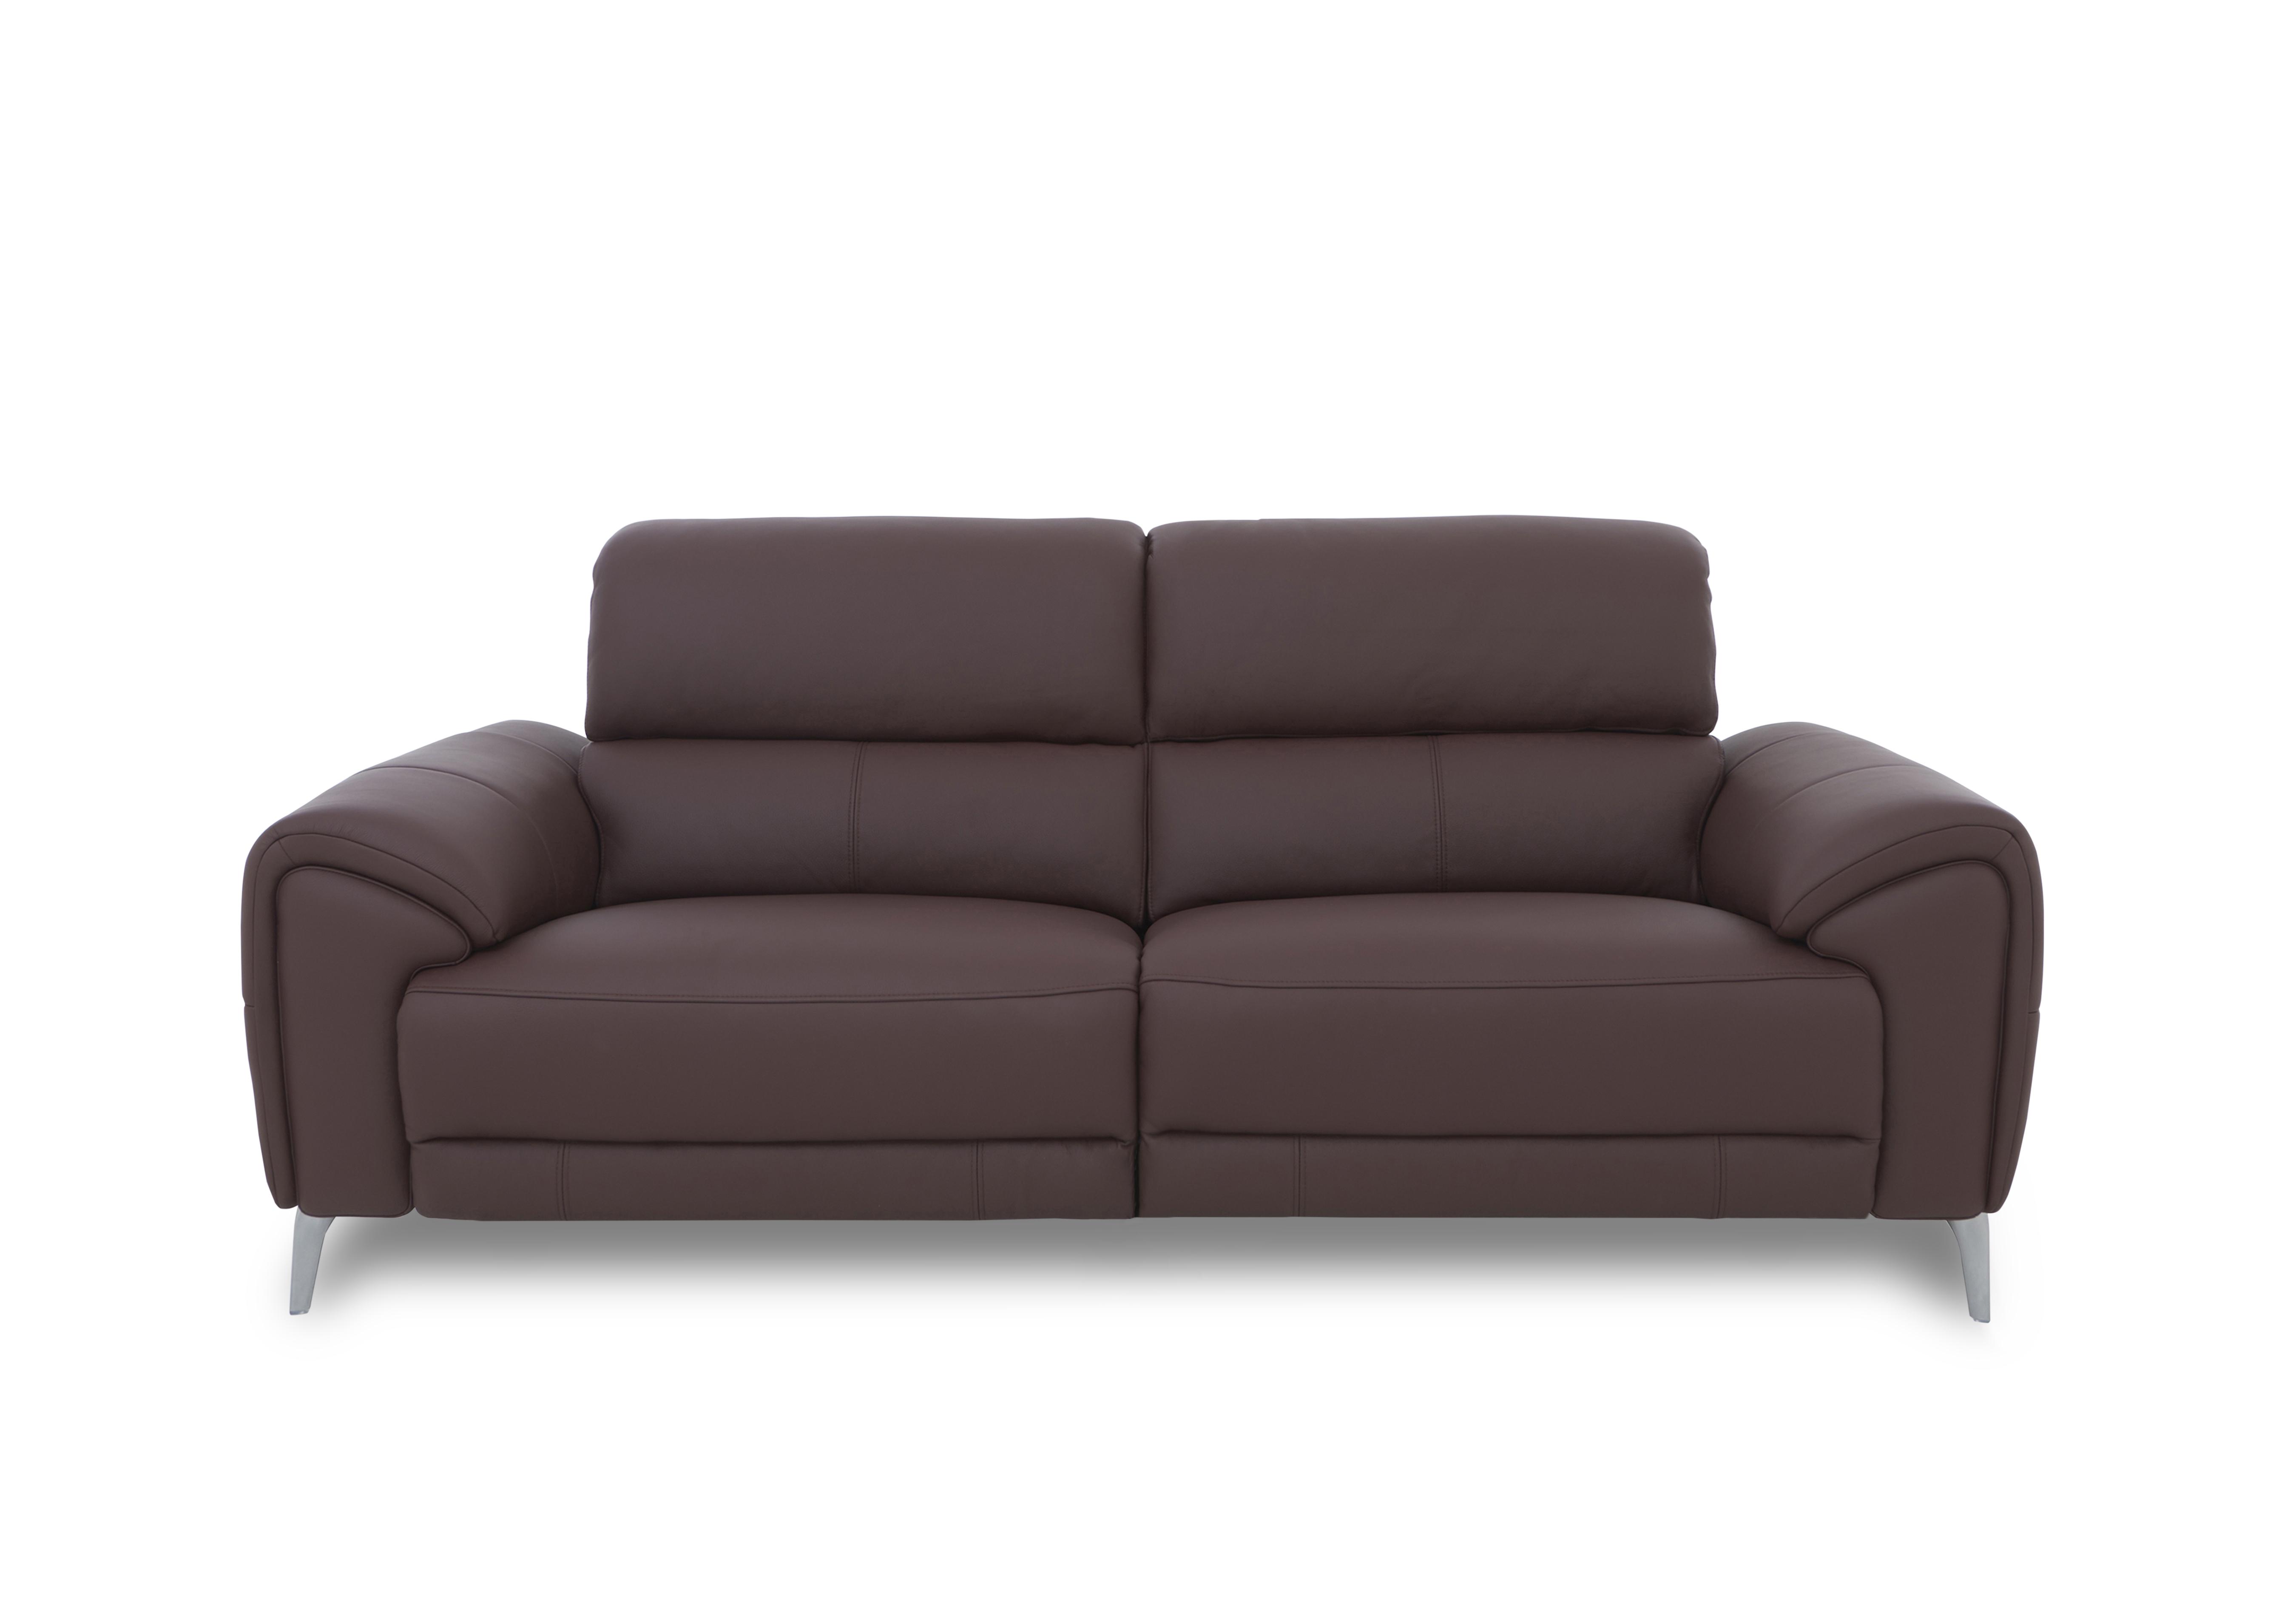 Vino Leather 3 Seater Power Recliner Sofa with Power Headrests and Heated Seats in Cat-40/30 Oslo Mulberry on Furniture Village